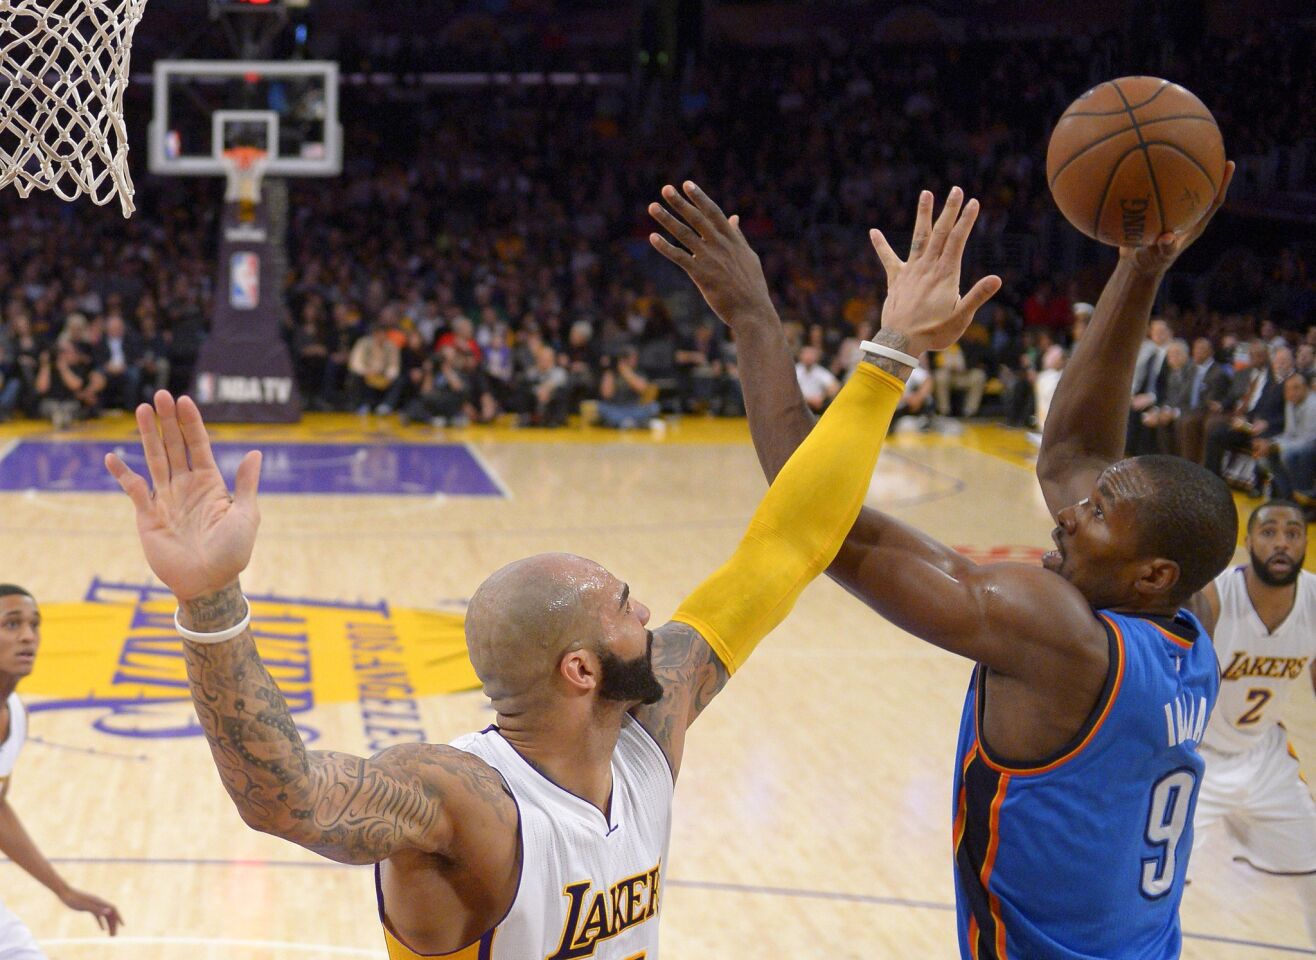 Thunder power forward Serge Ibaka goes up for a shot over the outstretched arm of Lakers power forward Carlos Boozer.